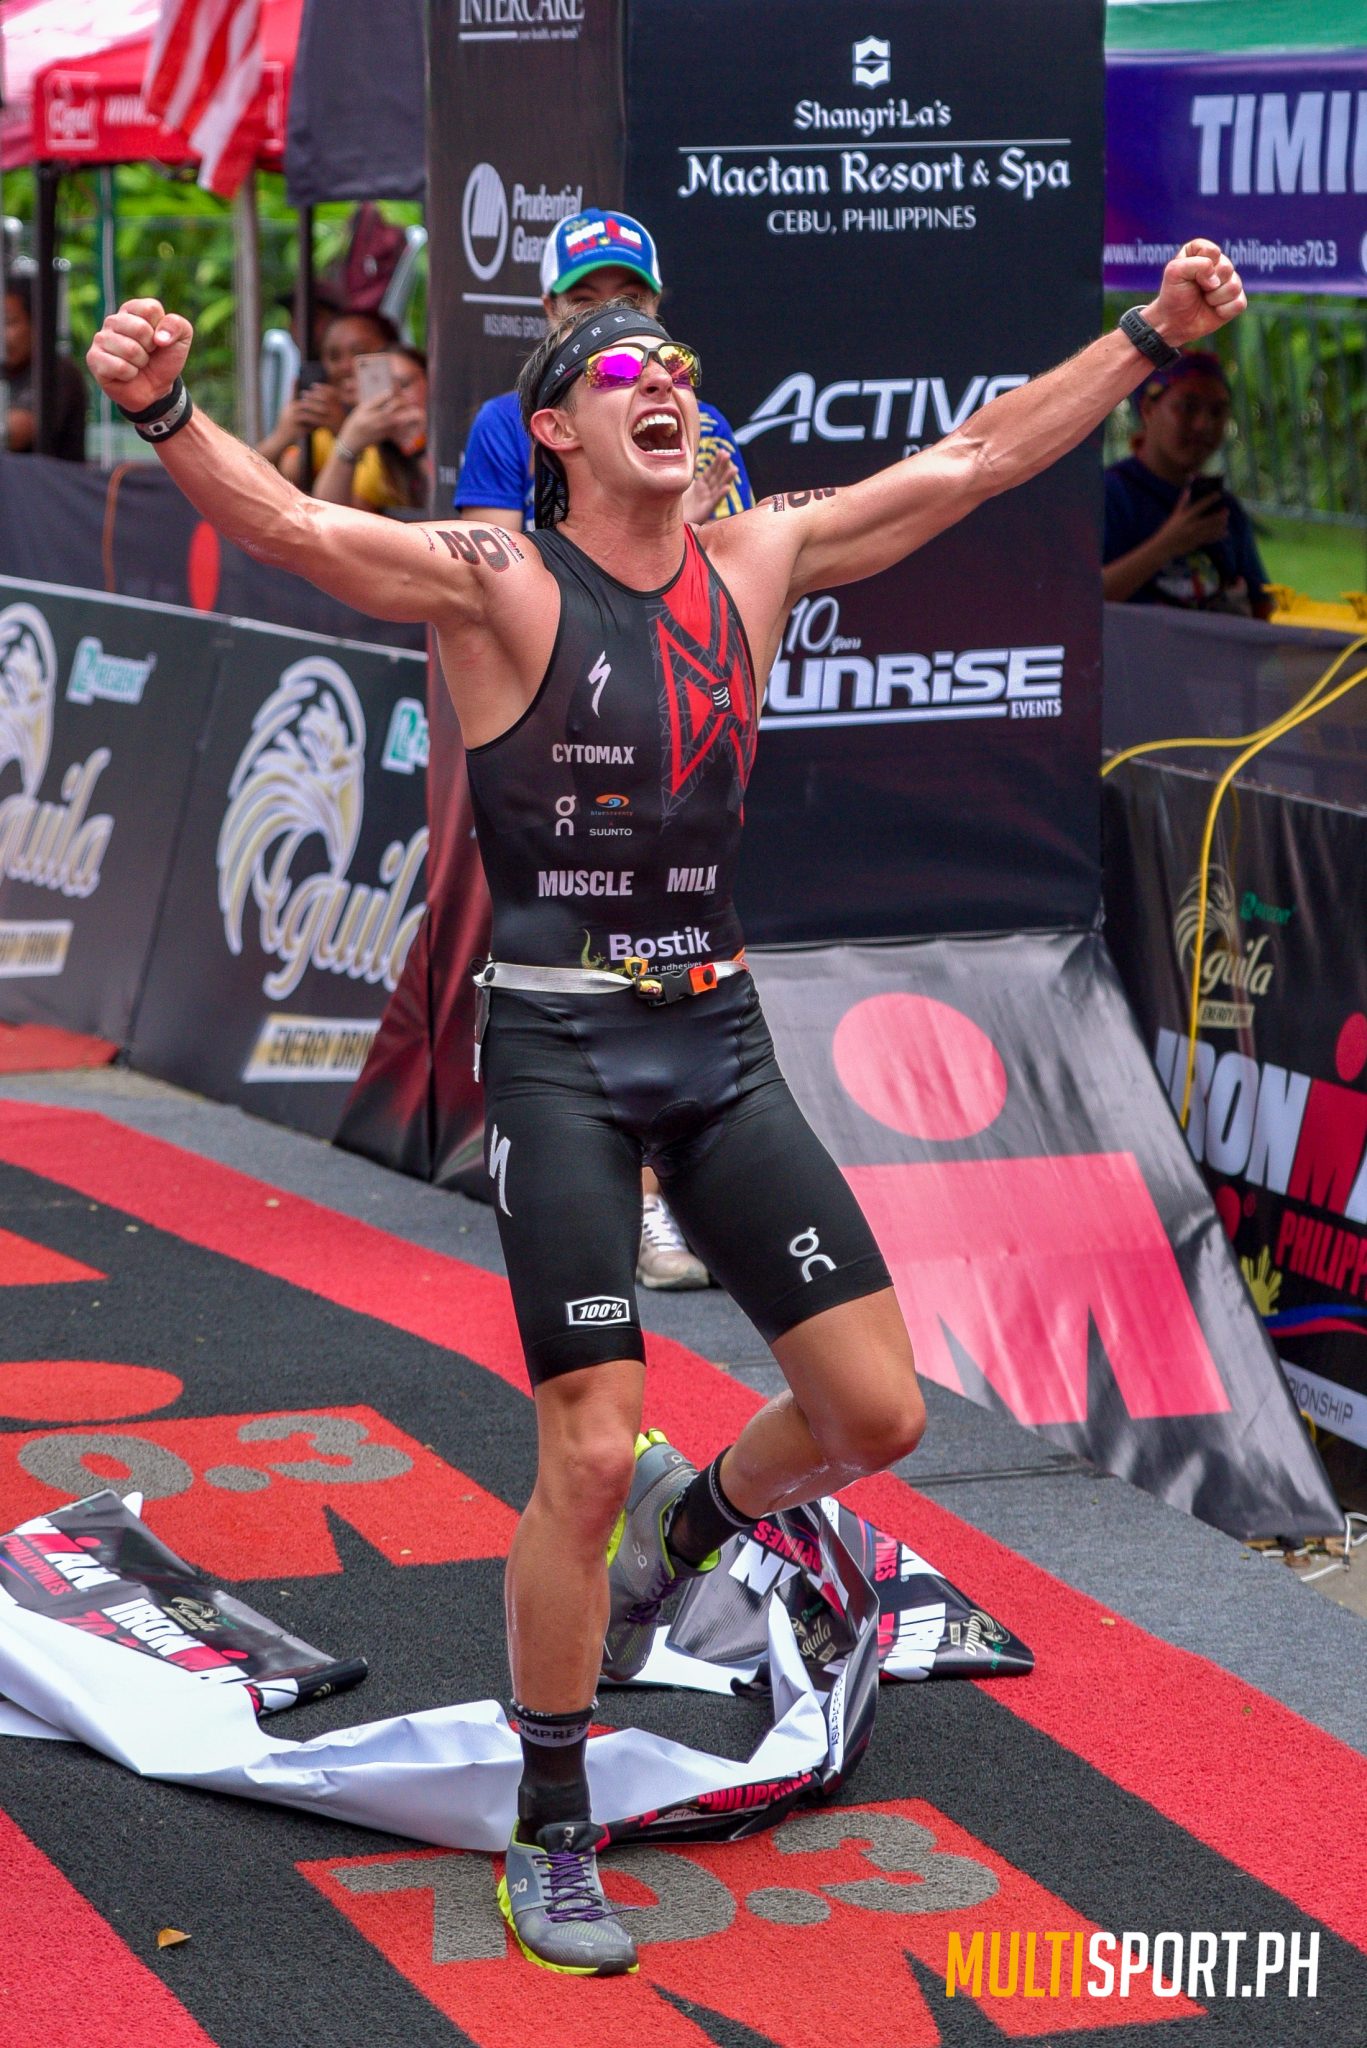 This is arguably Mendez’s best performance (3:46), exceeding his most recent half Ironman win in Davao where he clocked in at 3:50.